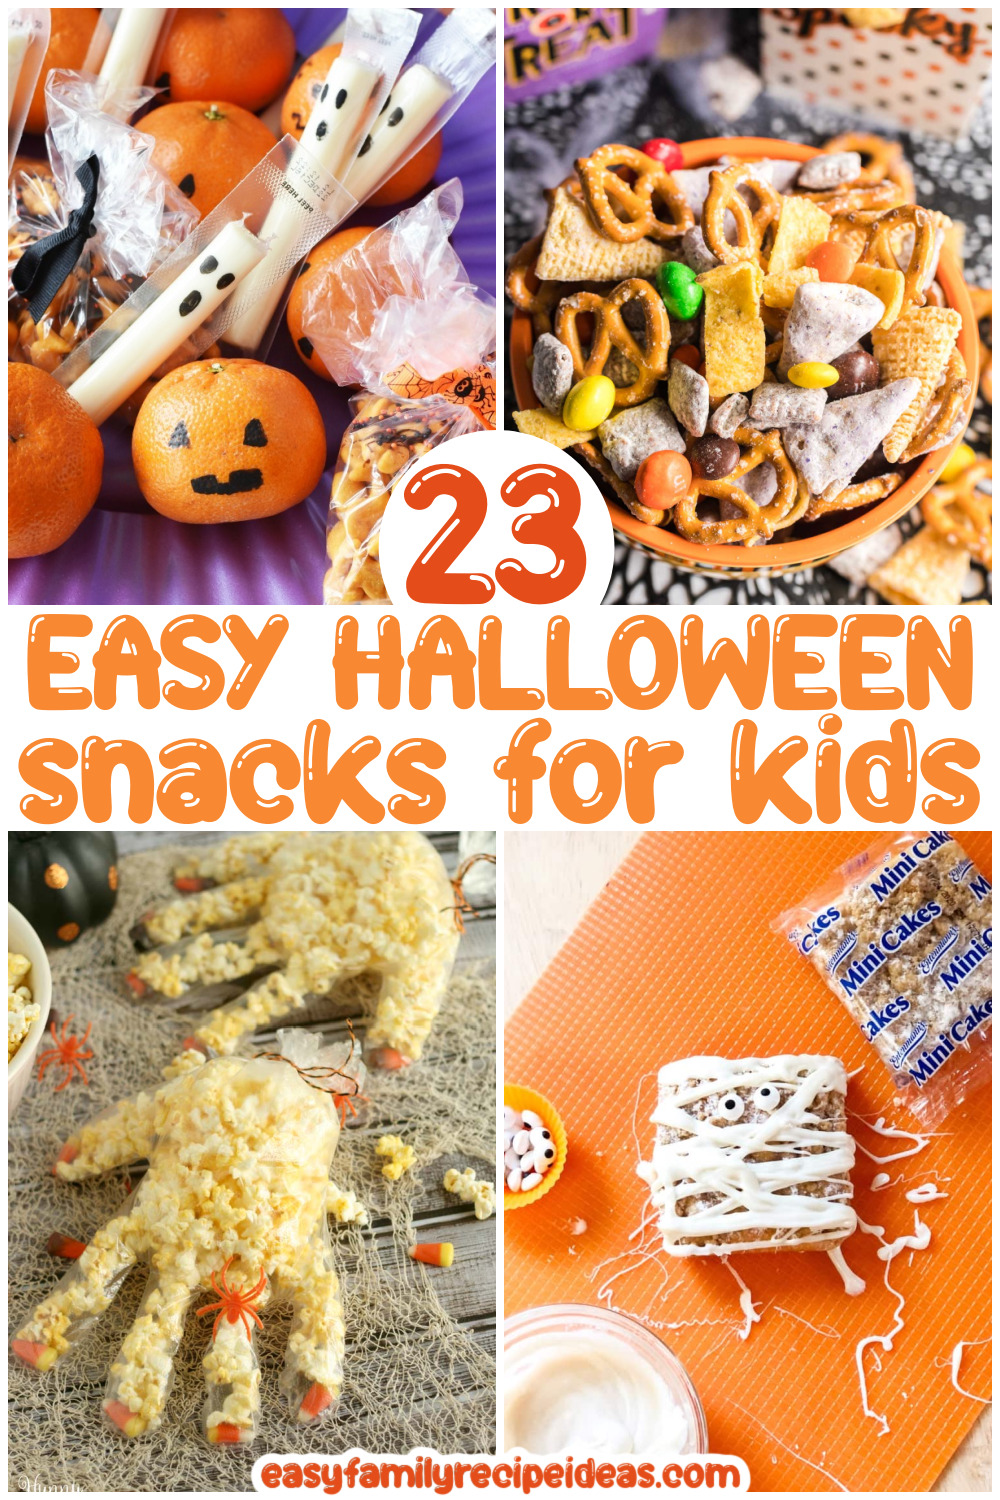 23 easy Halloween snacks that your children will love! From Halloween snack mix and Halloween brownies to delicious dips and finger foods, find the spooky and easy Halloween snacks to serve at your party! Easy Halloween Treats for School or a Party